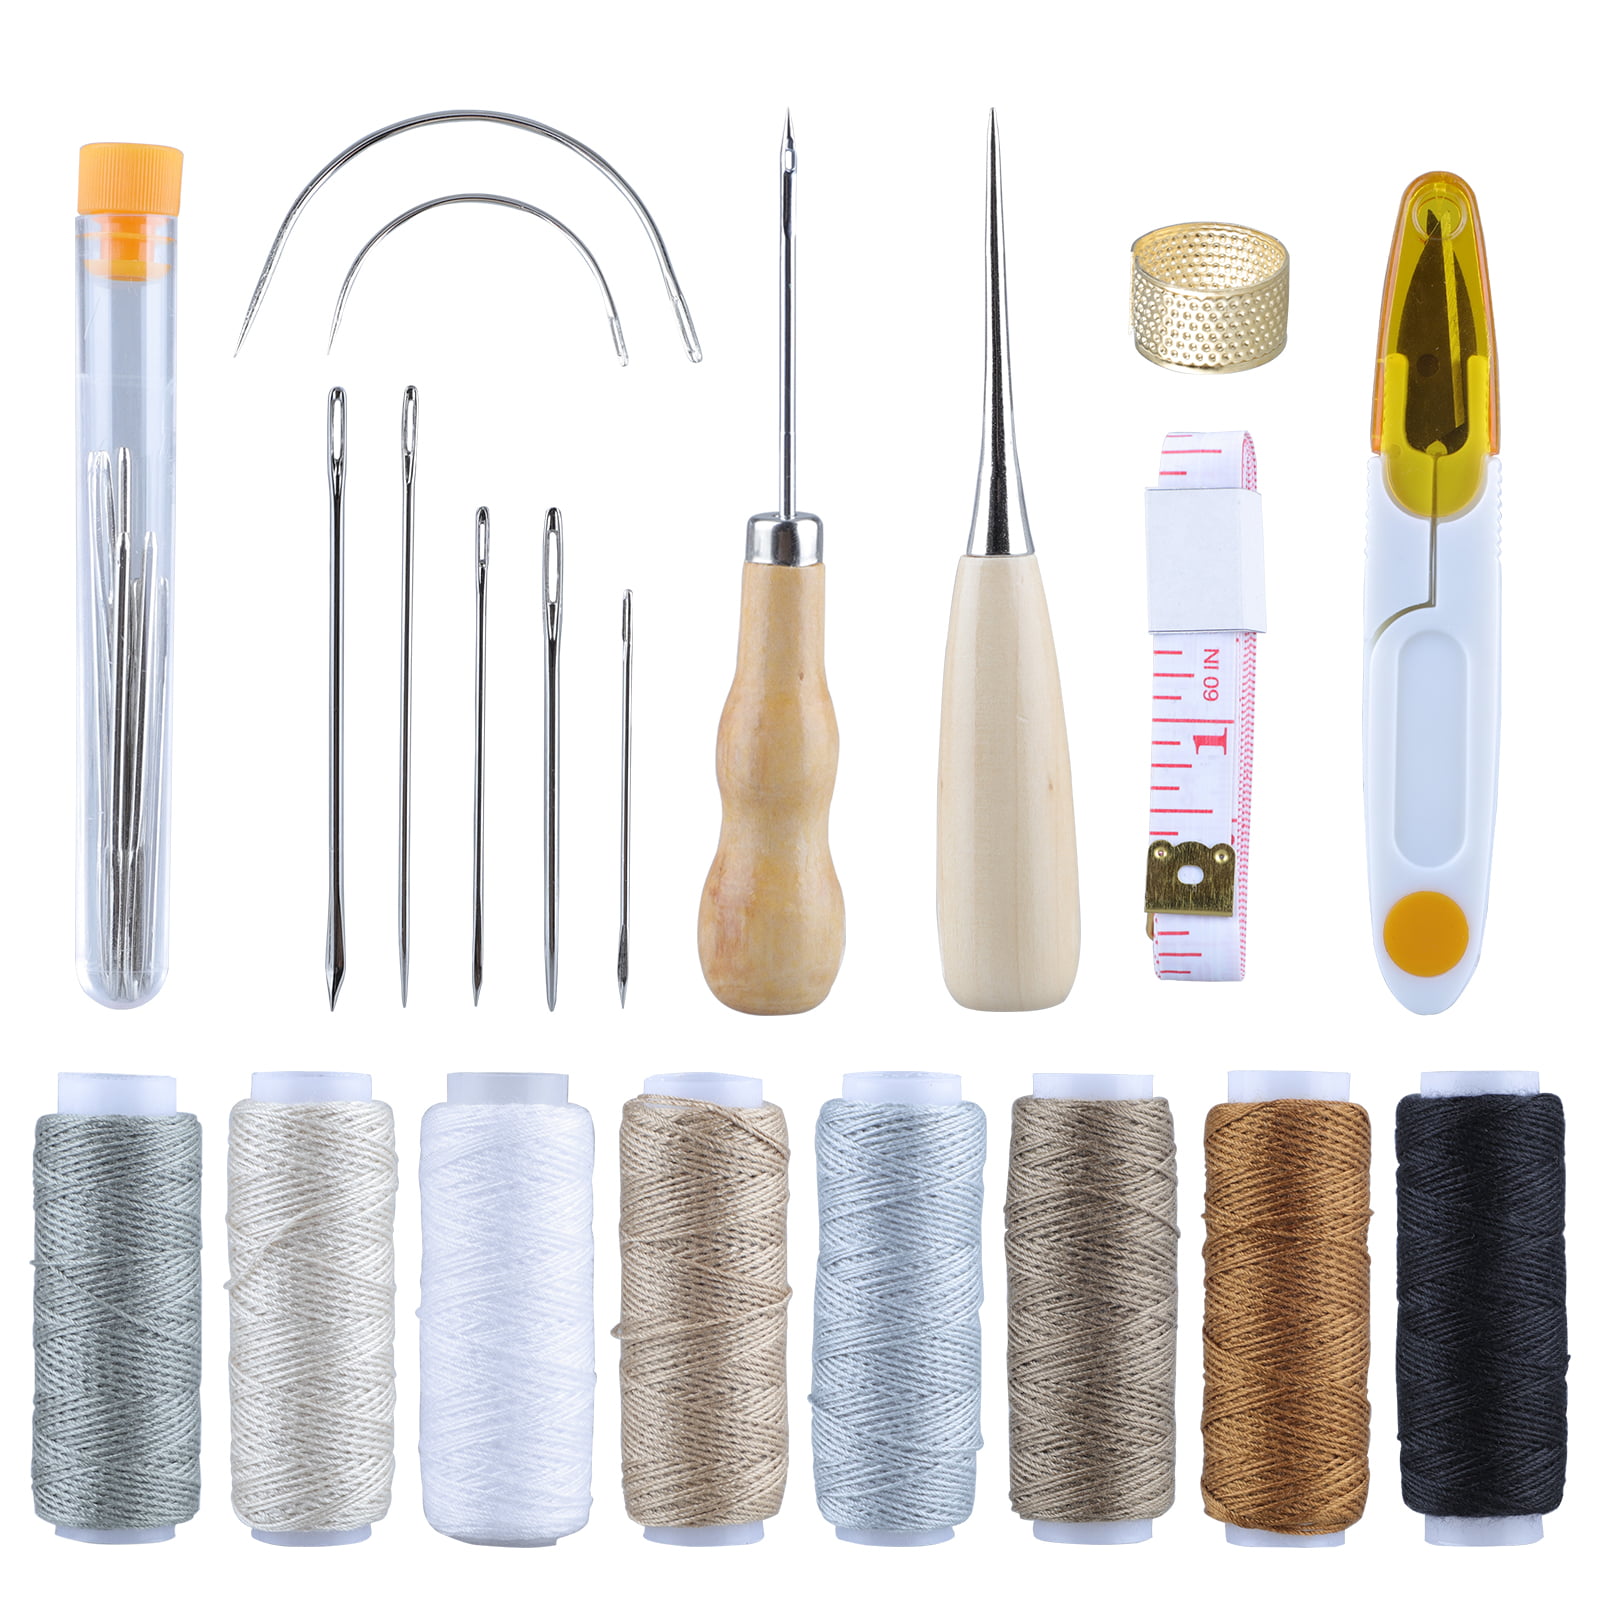 Leather Repair Tools Sewing Drilling Wood Waxed Thread Craft Set Awl Needles